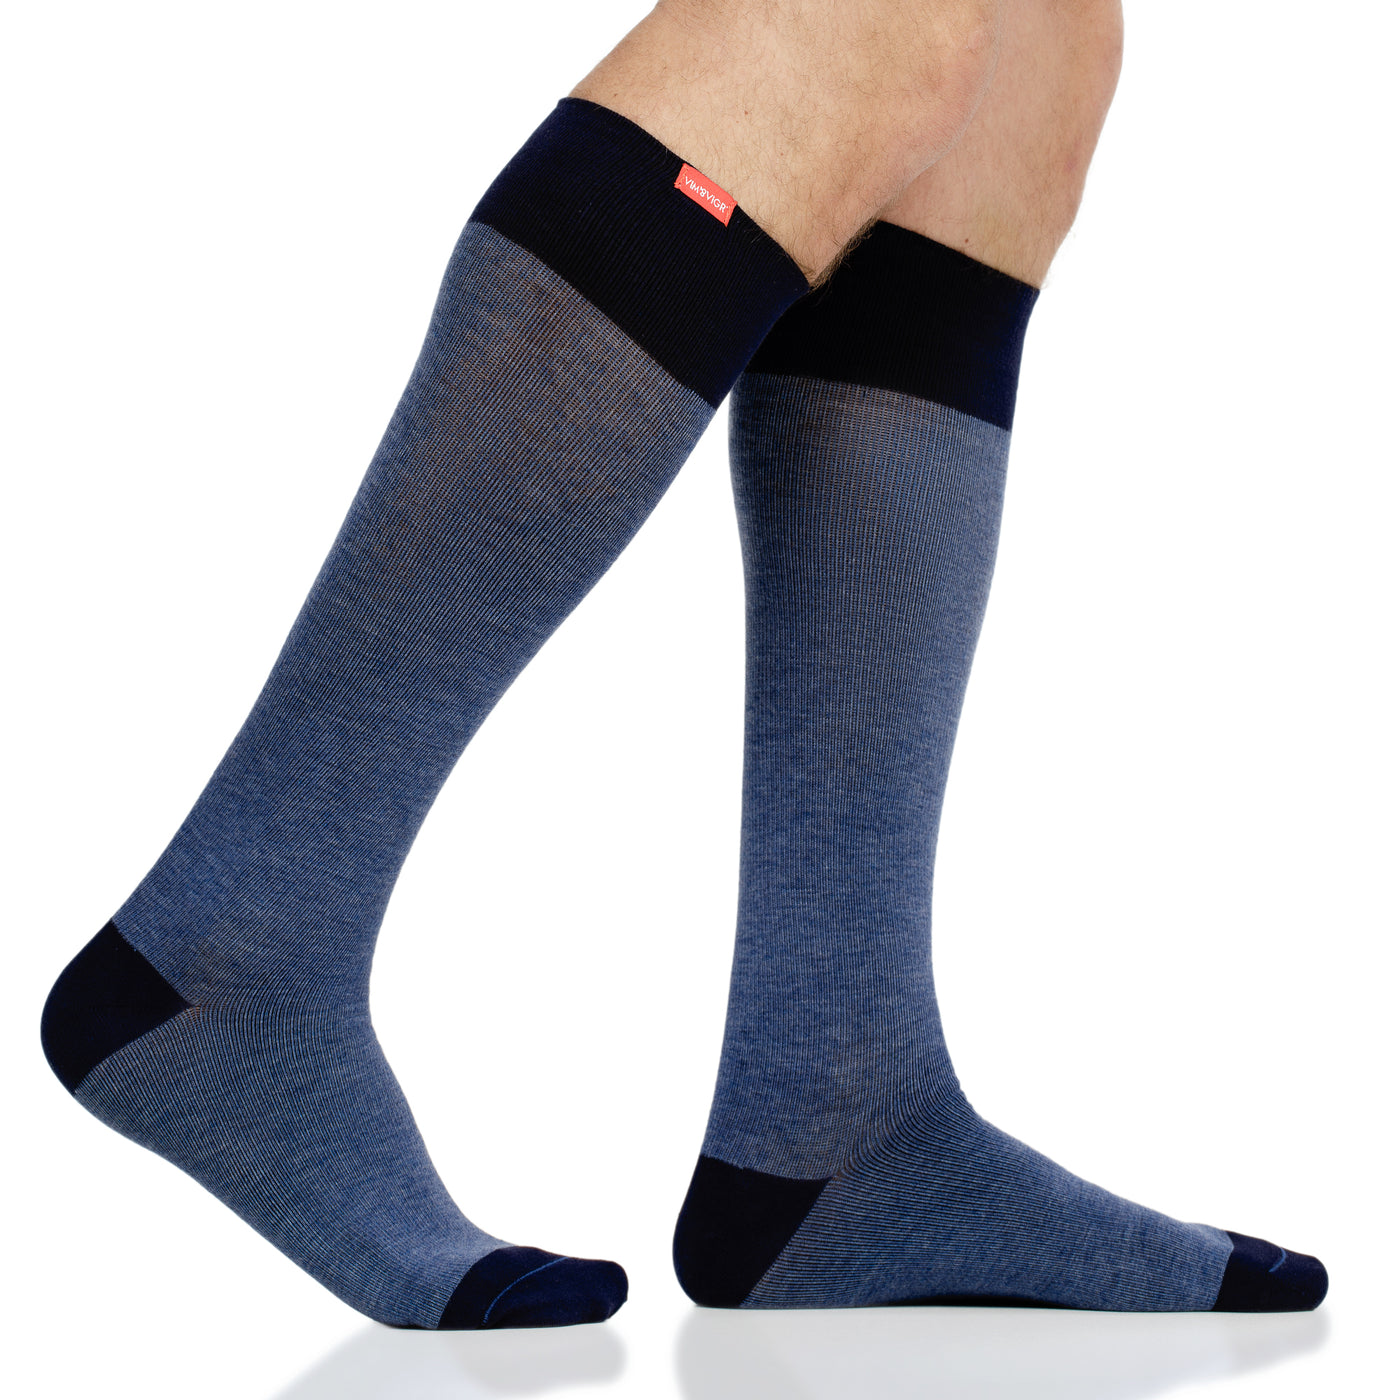 Cotton medical-grade 20-30 mmHg: Heathered Collection Navy (Cotton) compression socks for men & women